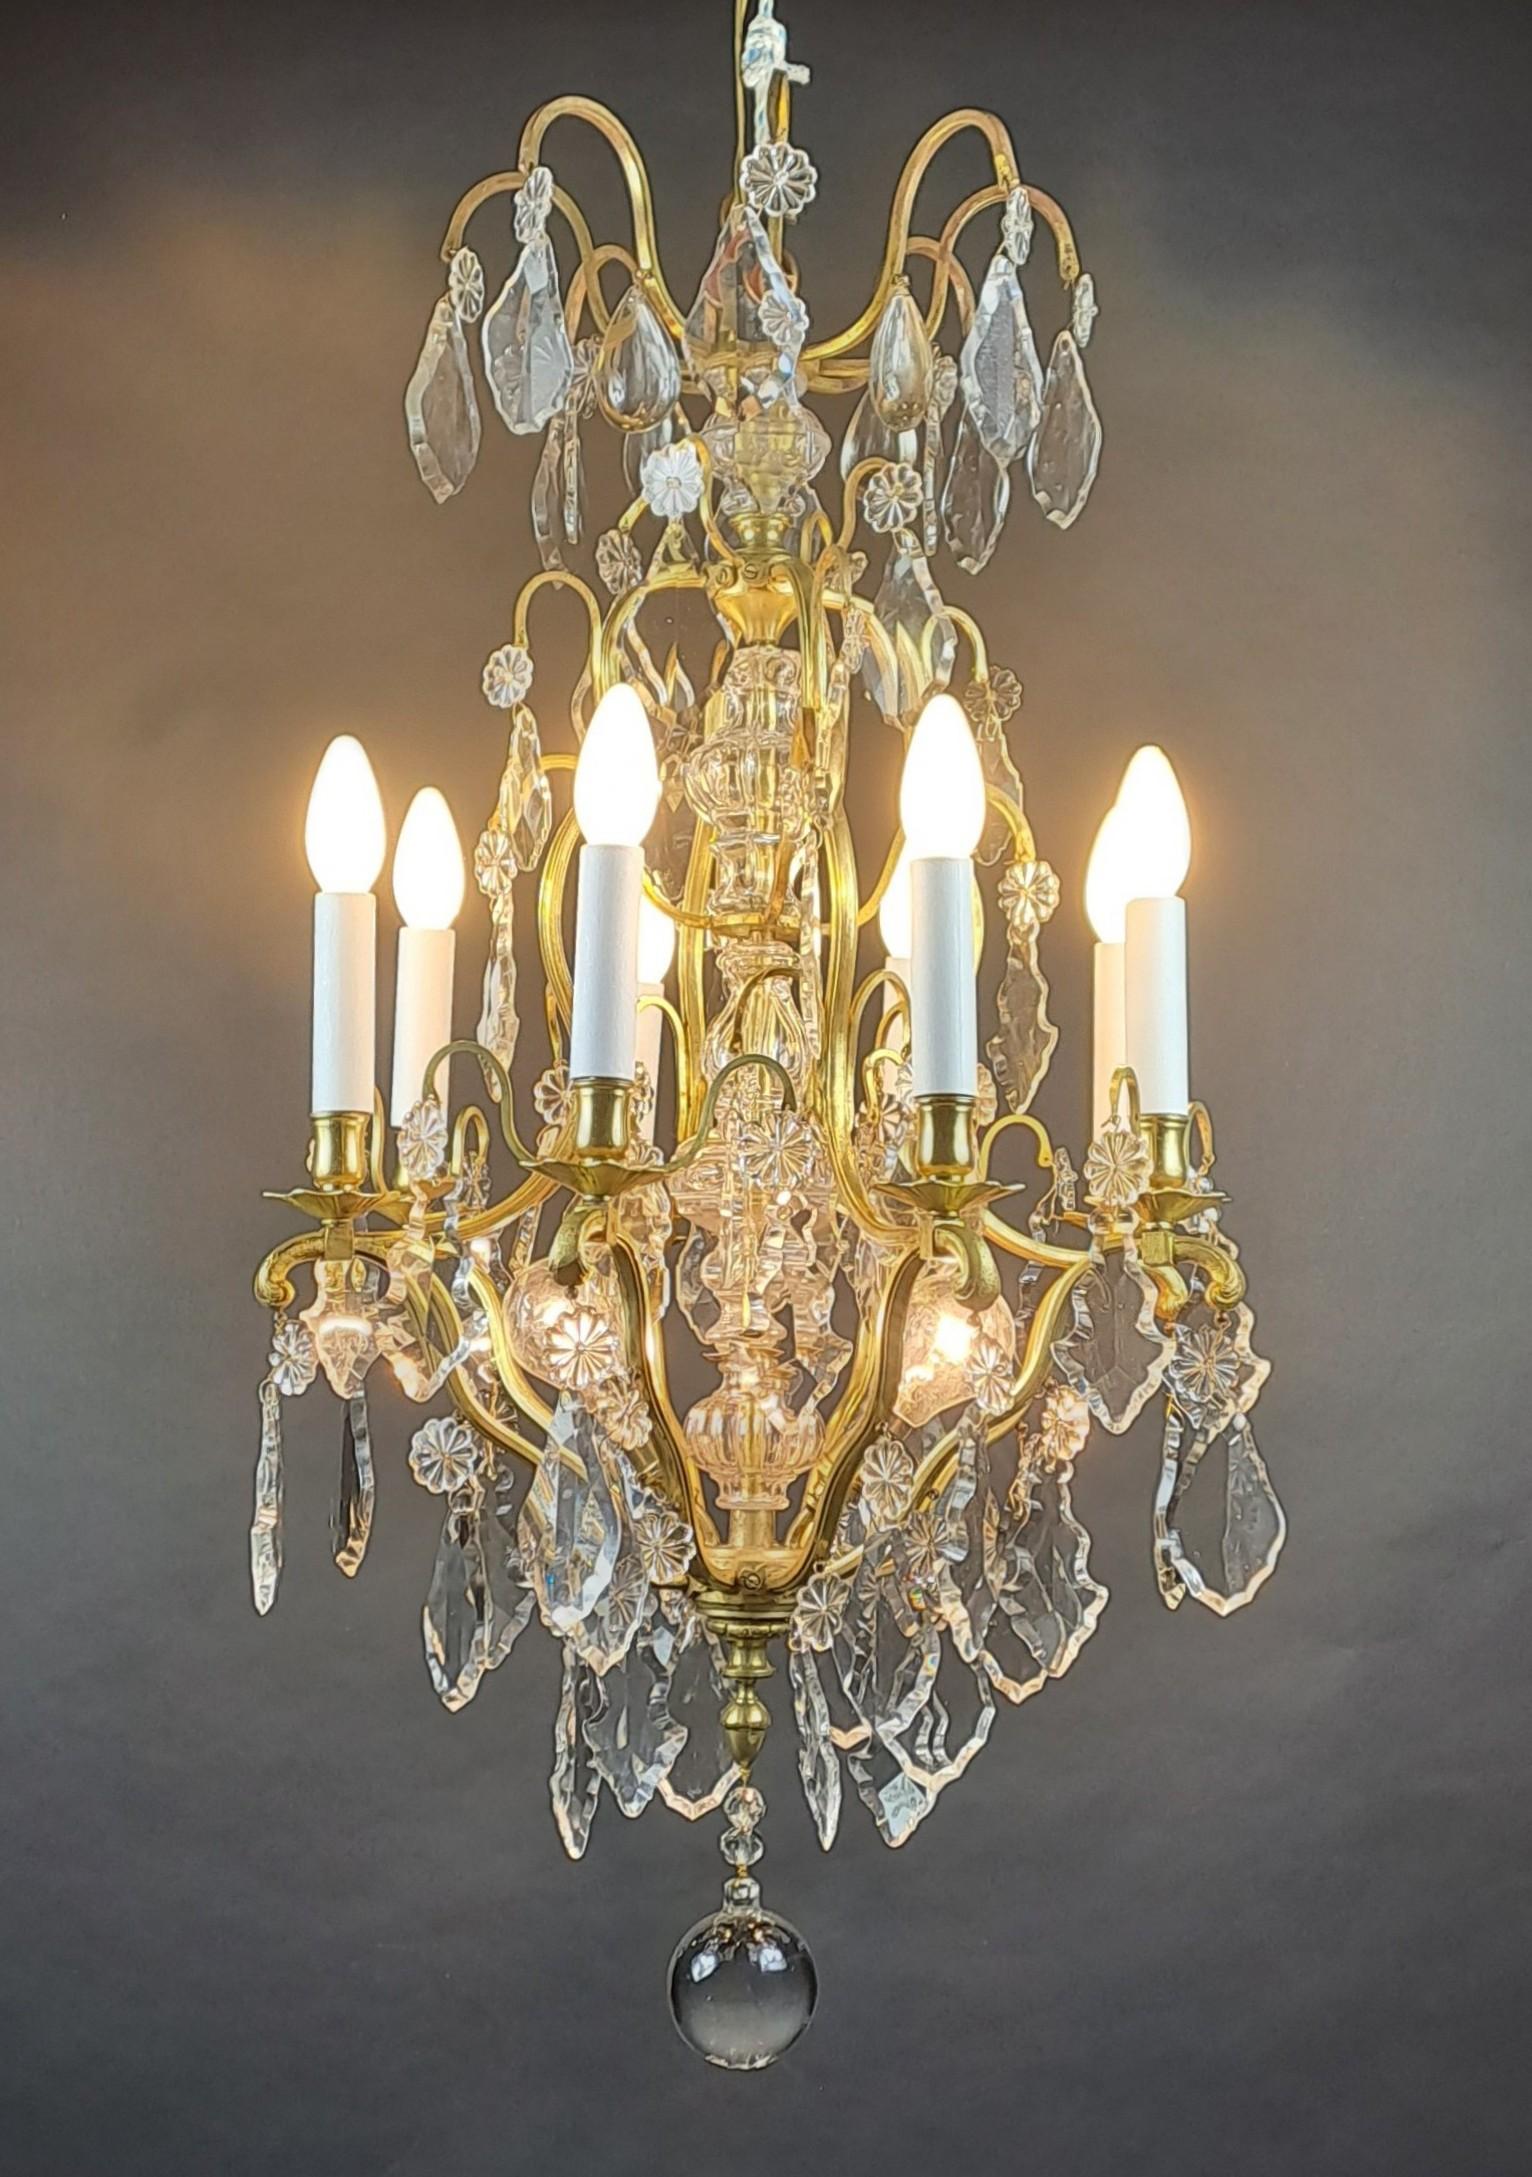 Magnificent Louis XV style cage chandelier in gilded bronze very richly decorated with crystal pendants from the Baccarat crystal factory.
Iluminating with eight arms of light and two points of light in the center

French work from the end of the